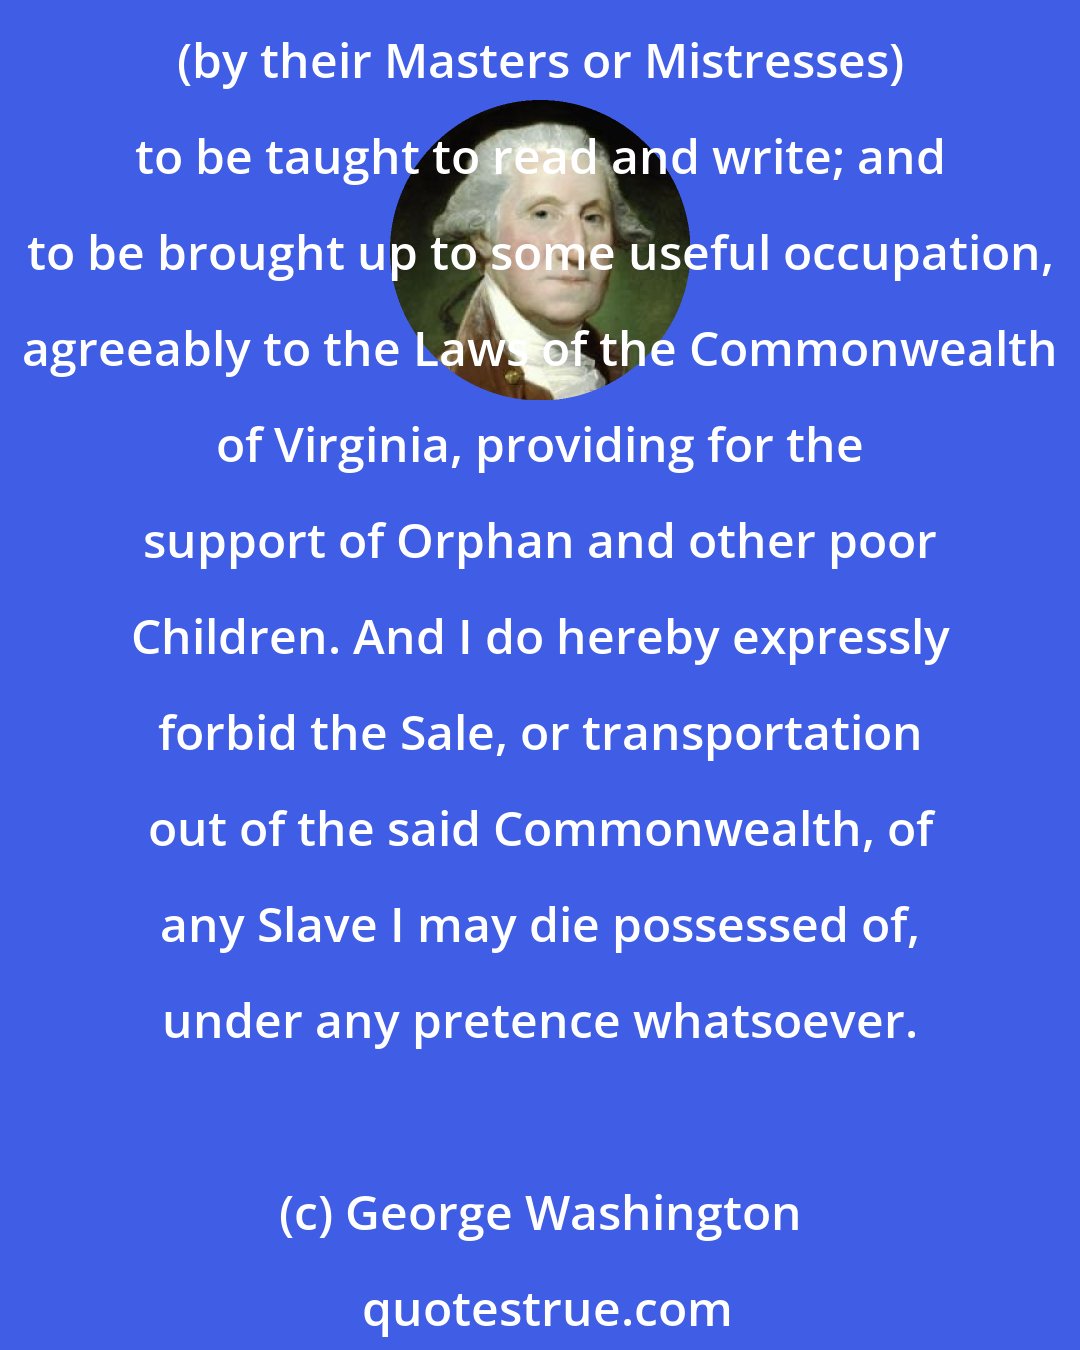 George Washington: Upon the decease [of] my wife, it is my Will and desire th[at] all the Slaves which I hold in [my] own right, shall receive their free[dom] . . . . The Negroes thus bound, are (by their Masters or Mistresses) to be taught to read and write; and to be brought up to some useful occupation, agreeably to the Laws of the Commonwealth of Virginia, providing for the support of Orphan and other poor Children. And I do hereby expressly forbid the Sale, or transportation out of the said Commonwealth, of any Slave I may die possessed of, under any pretence whatsoever.